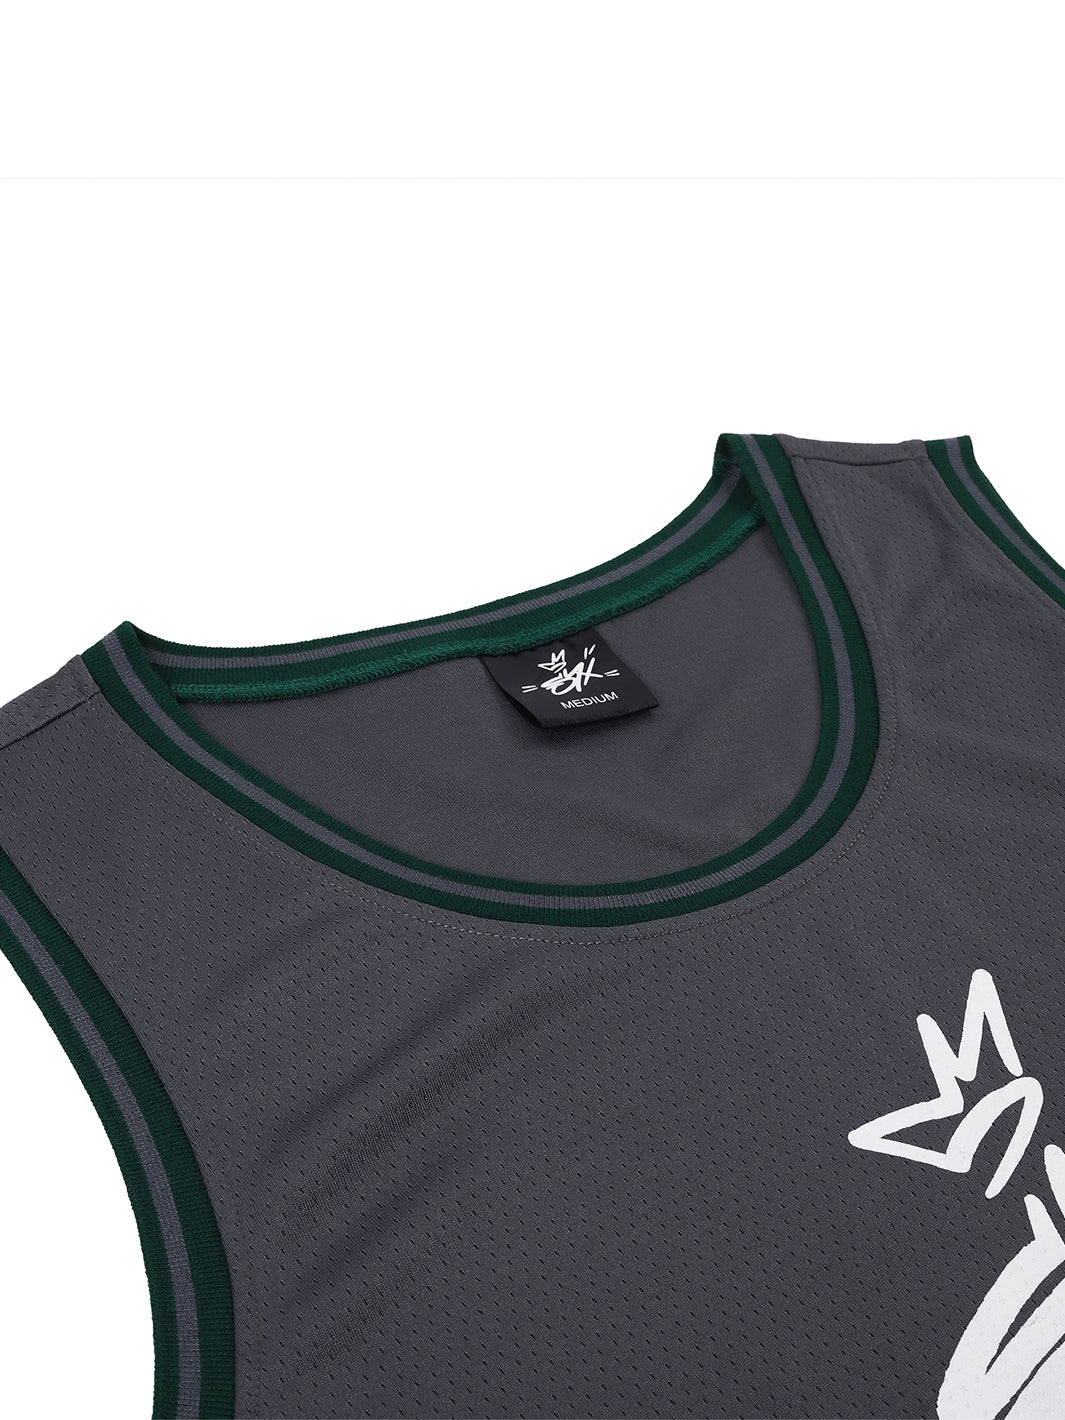 SYX Mesh Jersey